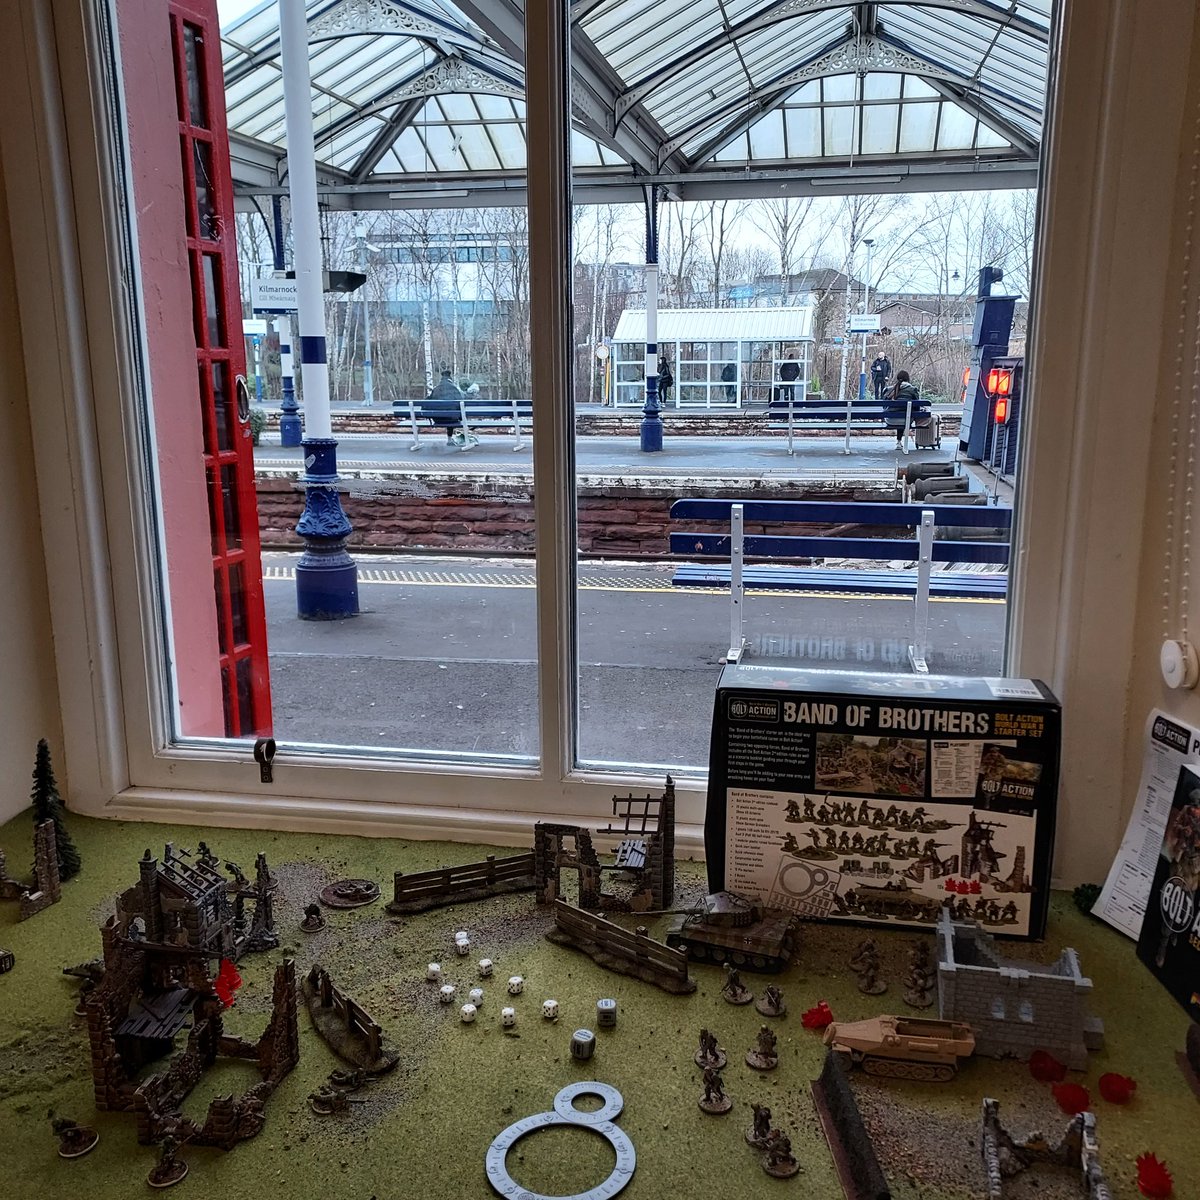 We're a charity run hobby shop based in a train station. What's the weirdest place you've ever found hobby? #WarhammerCommunity @ScotRail #Scotland